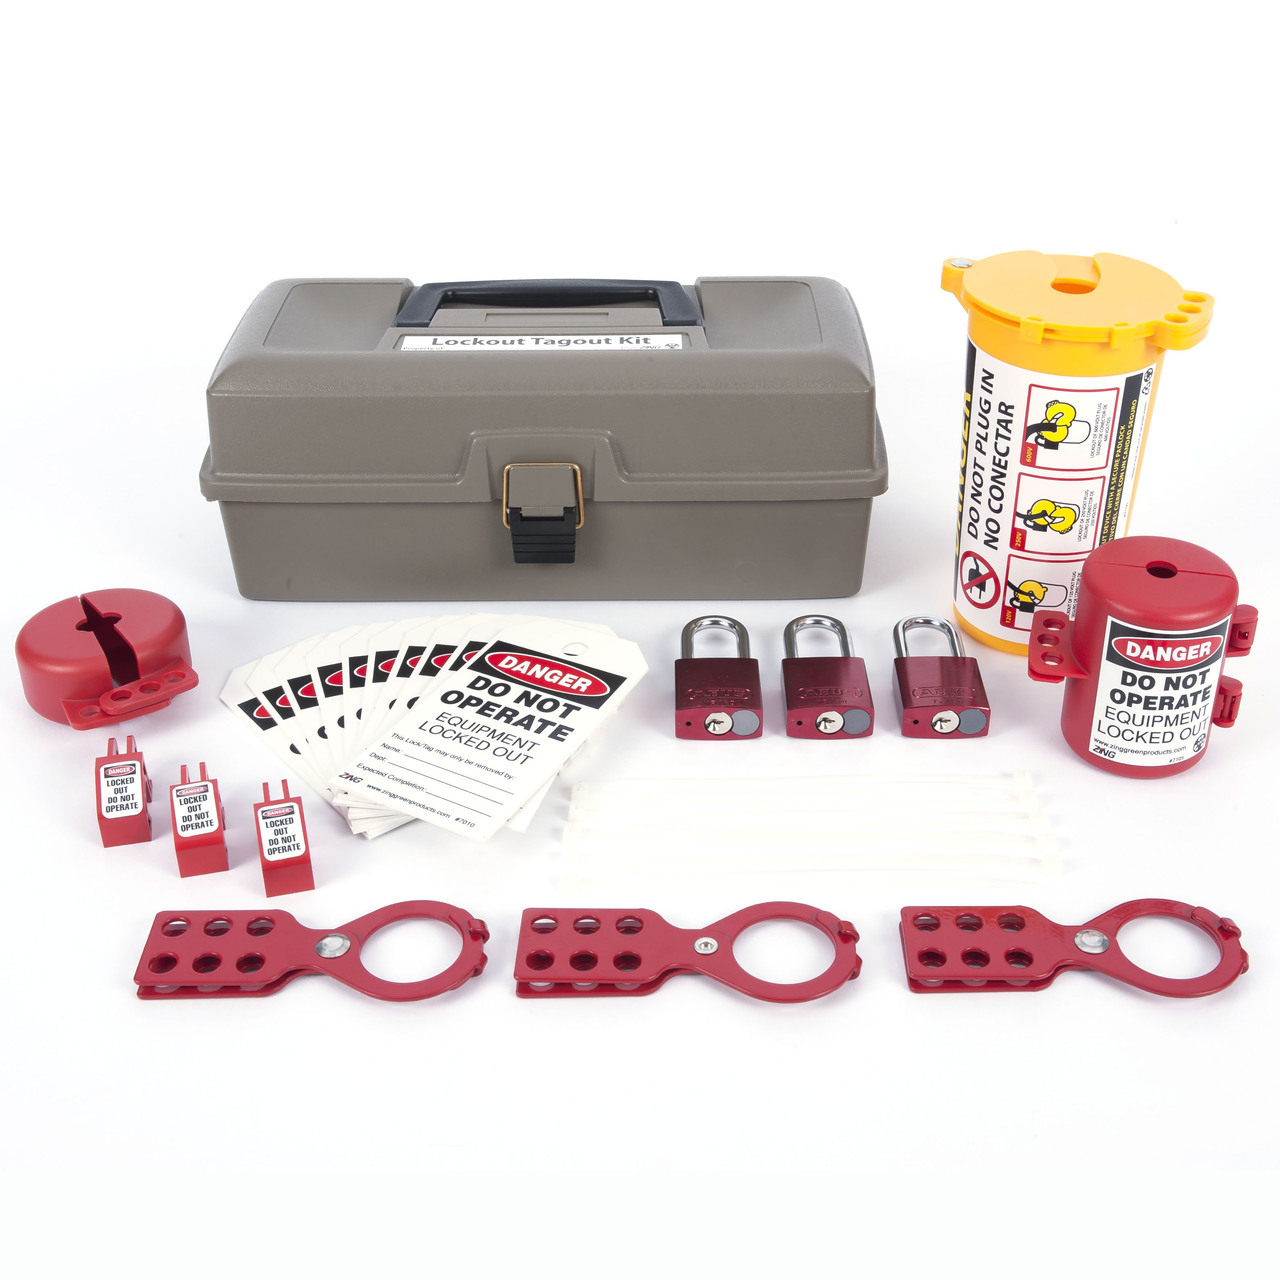 ZING RecycLockout Lockout Tagout Kit with Aluminum Padlocks, 32 Component, Deluxe Tool Box